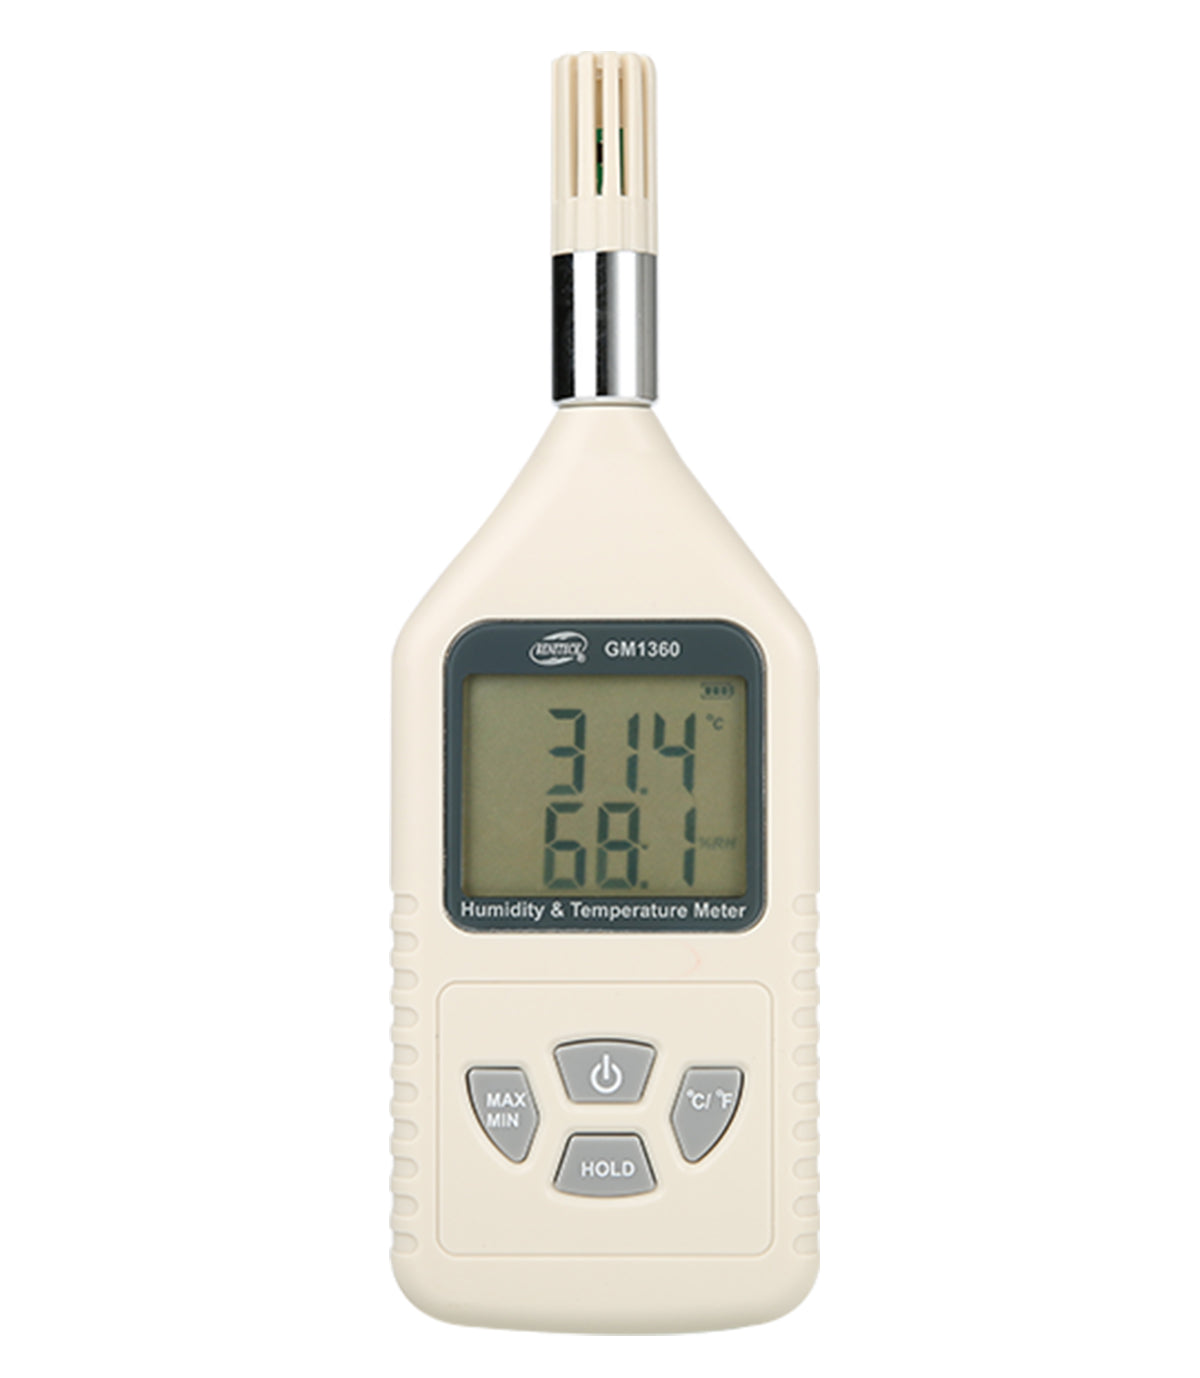 Super-Dry HGT Series Humidity and Temperature Gauge